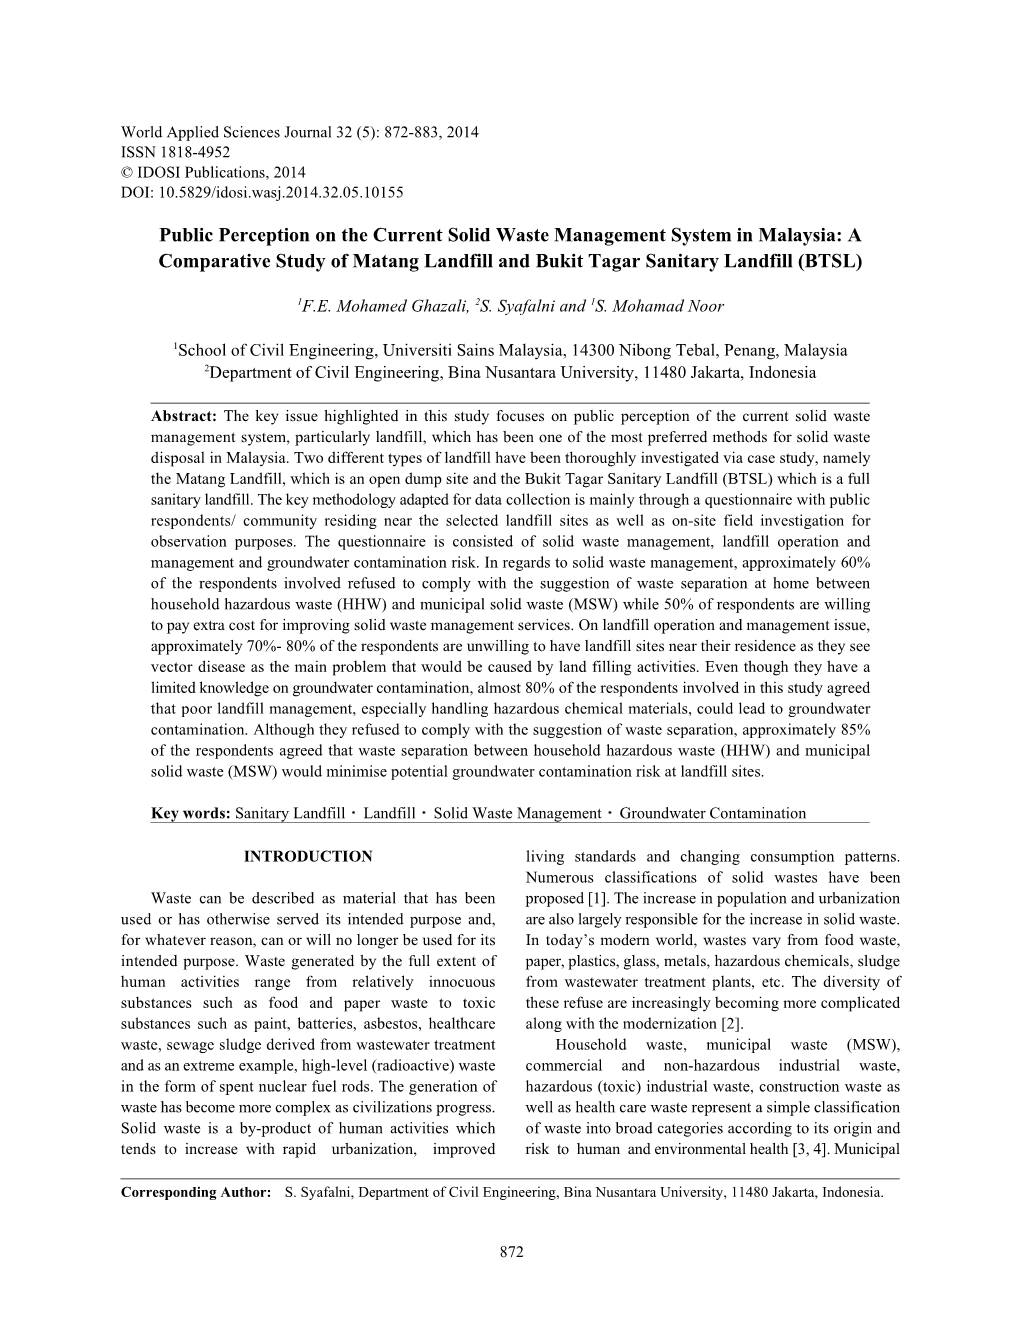 Public Perception on the Current Solid Waste Management System in Malaysia: a Comparative Study of Matang Landfill and Bukit Tagar Sanitary Landfill (BTSL)